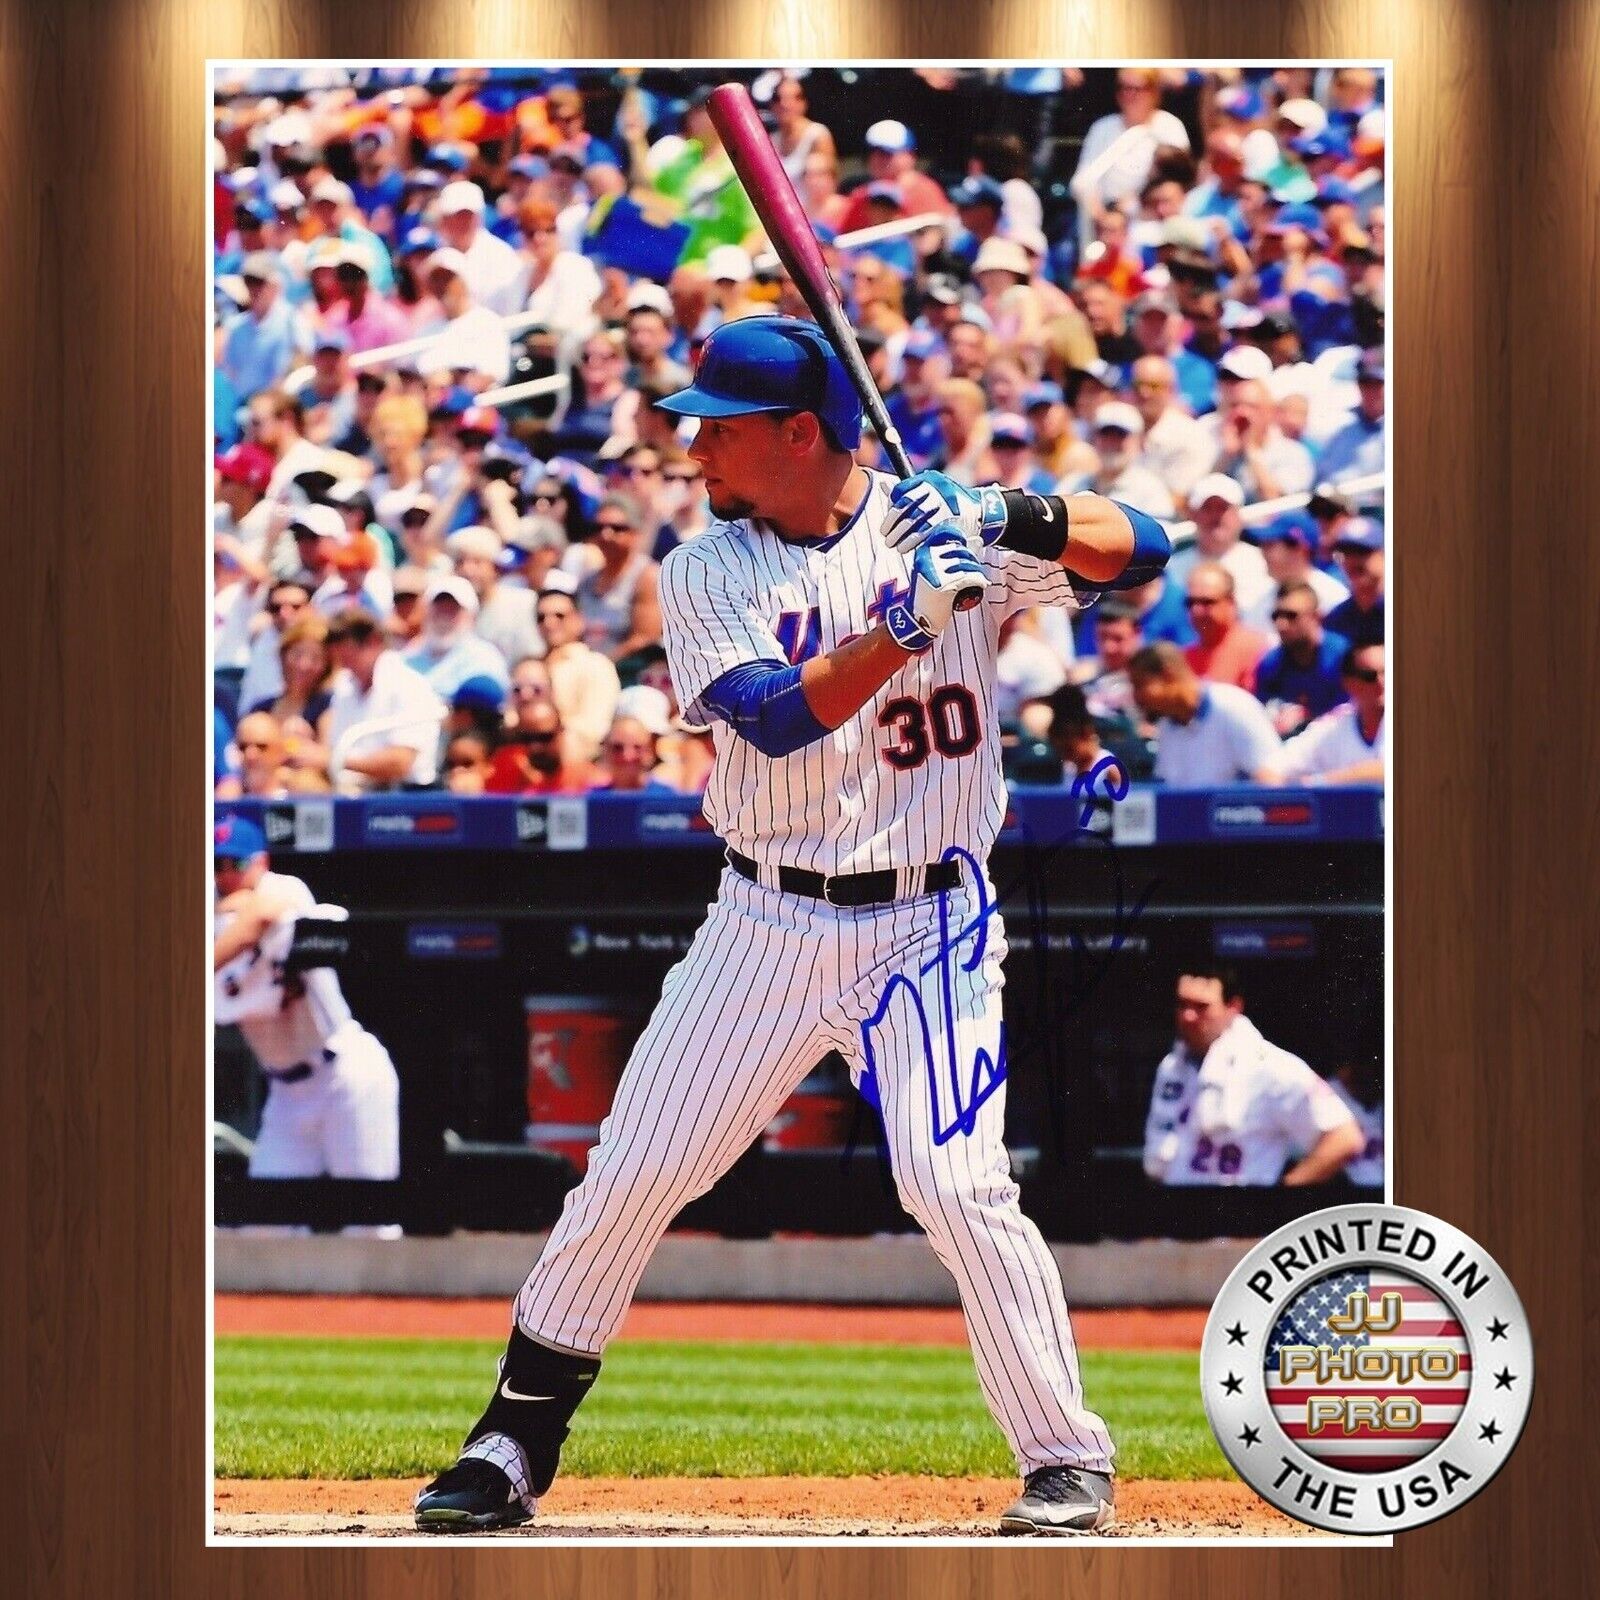 Michael Conforto Autographed Signed 8x10 Photo Poster painting (Mets) REPRINT